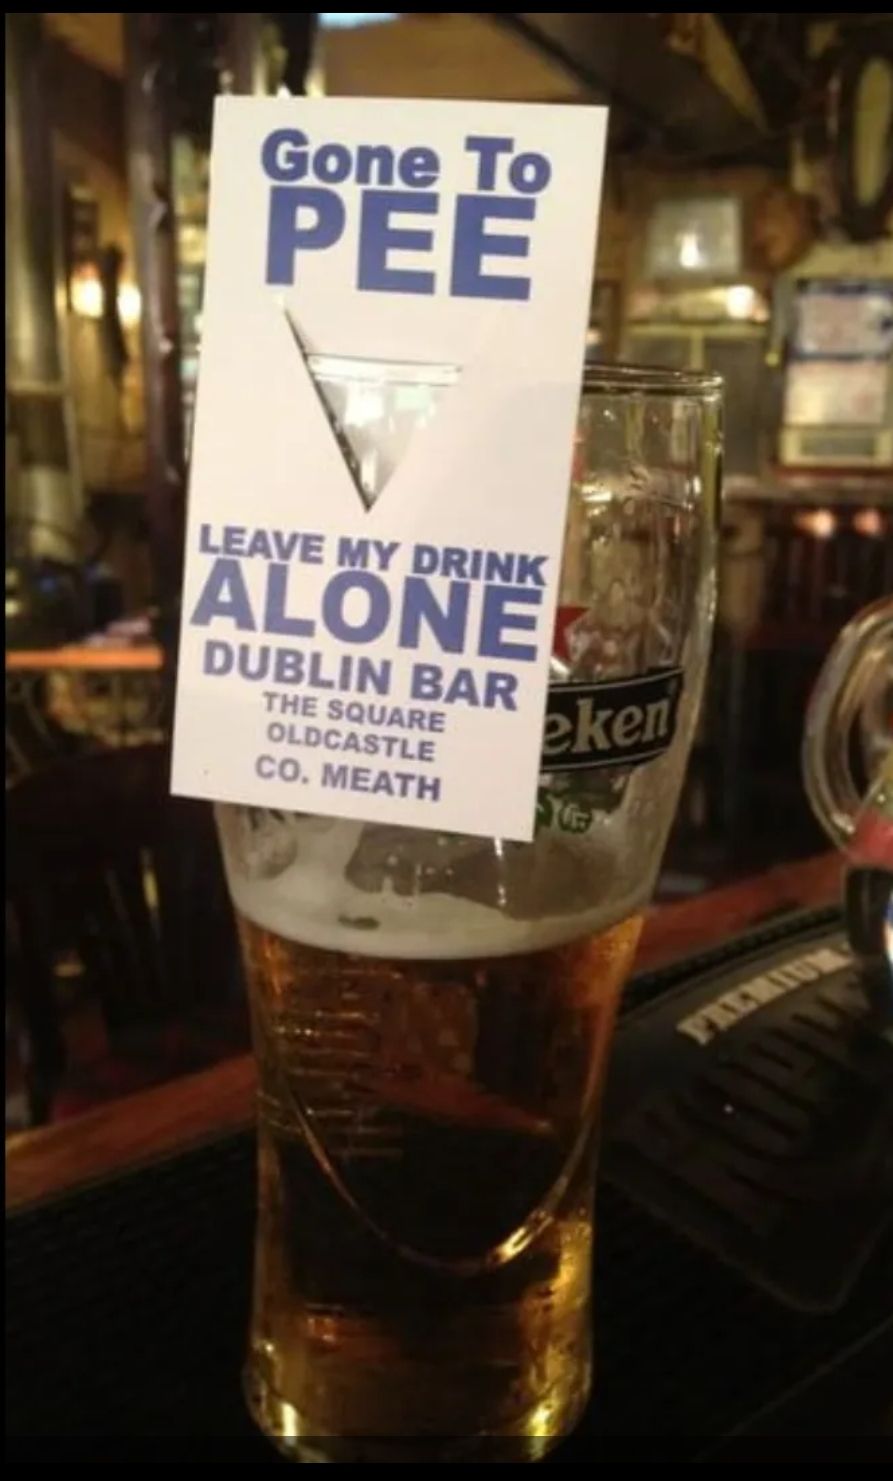 The pub I was in the other day started doing this.